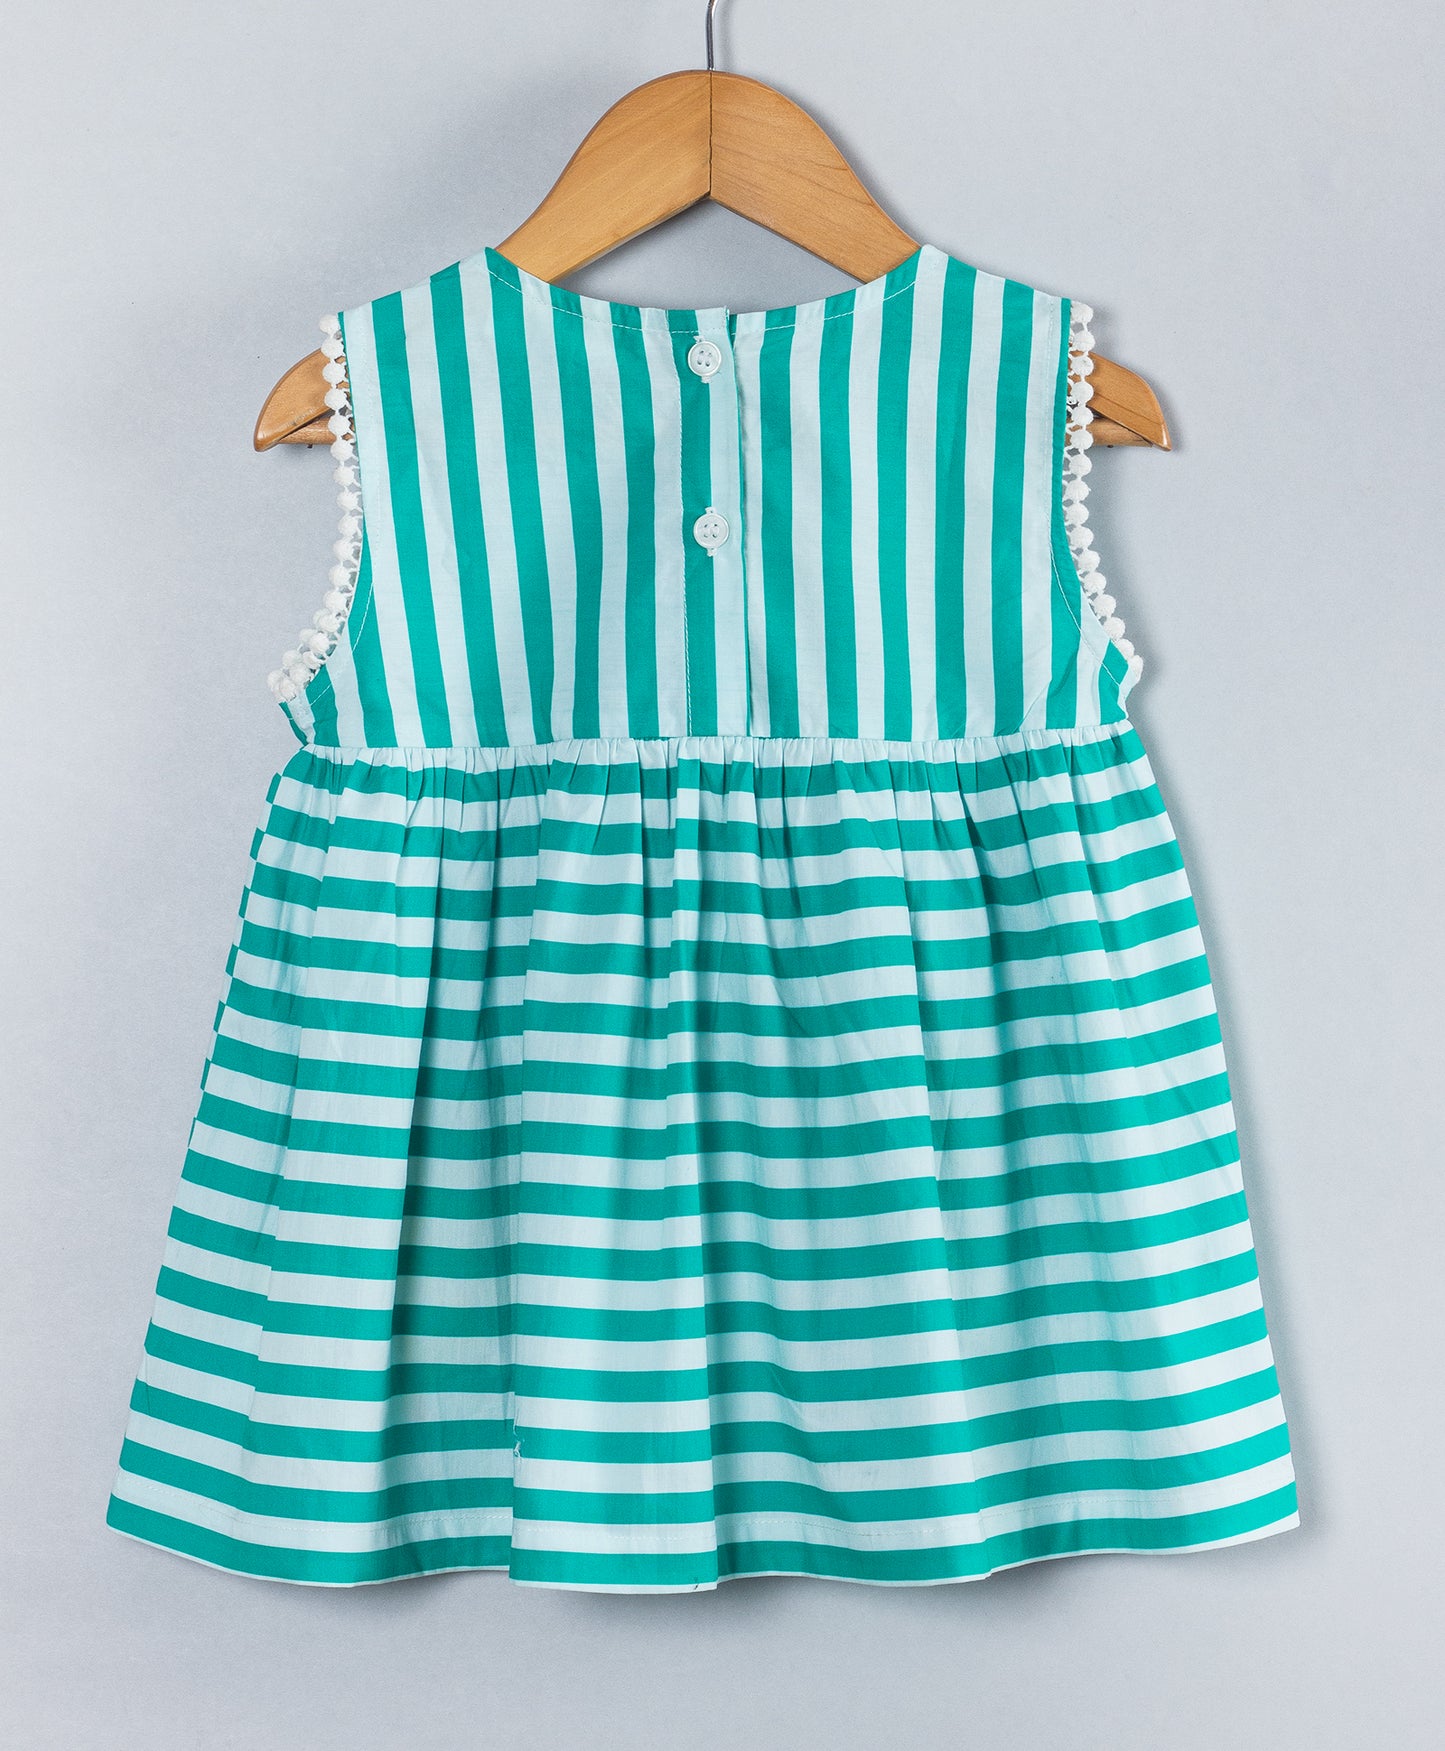 GREEN AND WHITE STRIPED PRINT TOP WITH FLOWER EMBROIDERY